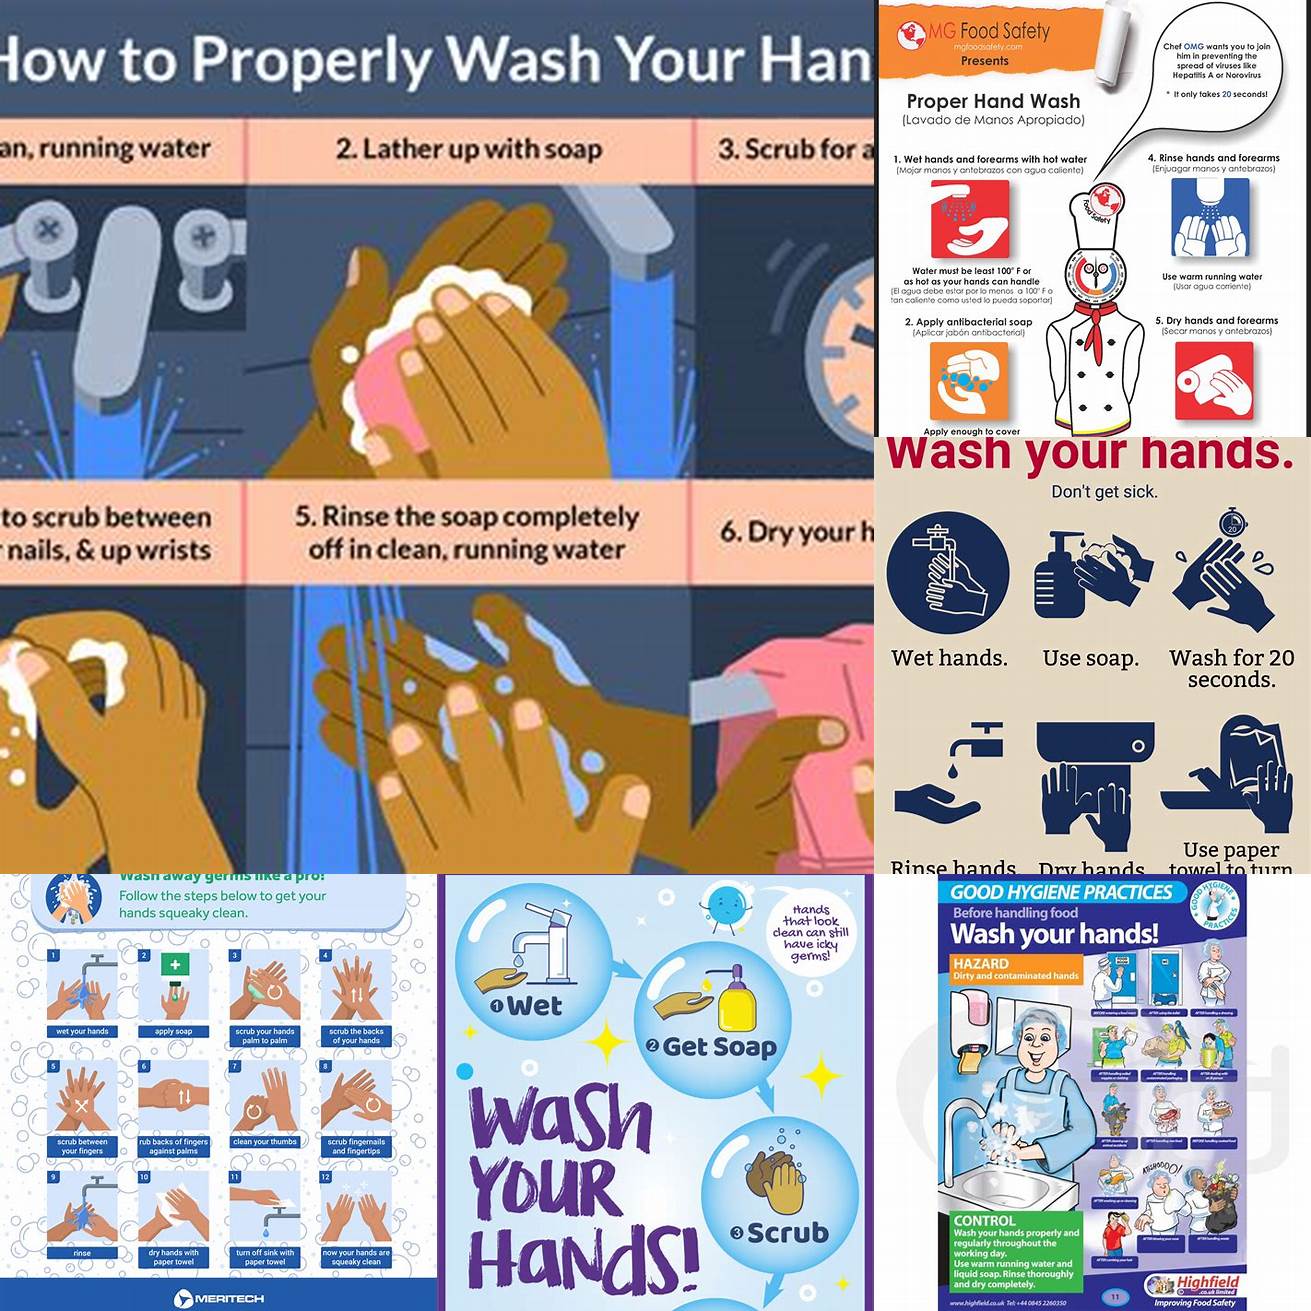 Wash your hands frequently and follow food safety guidelines